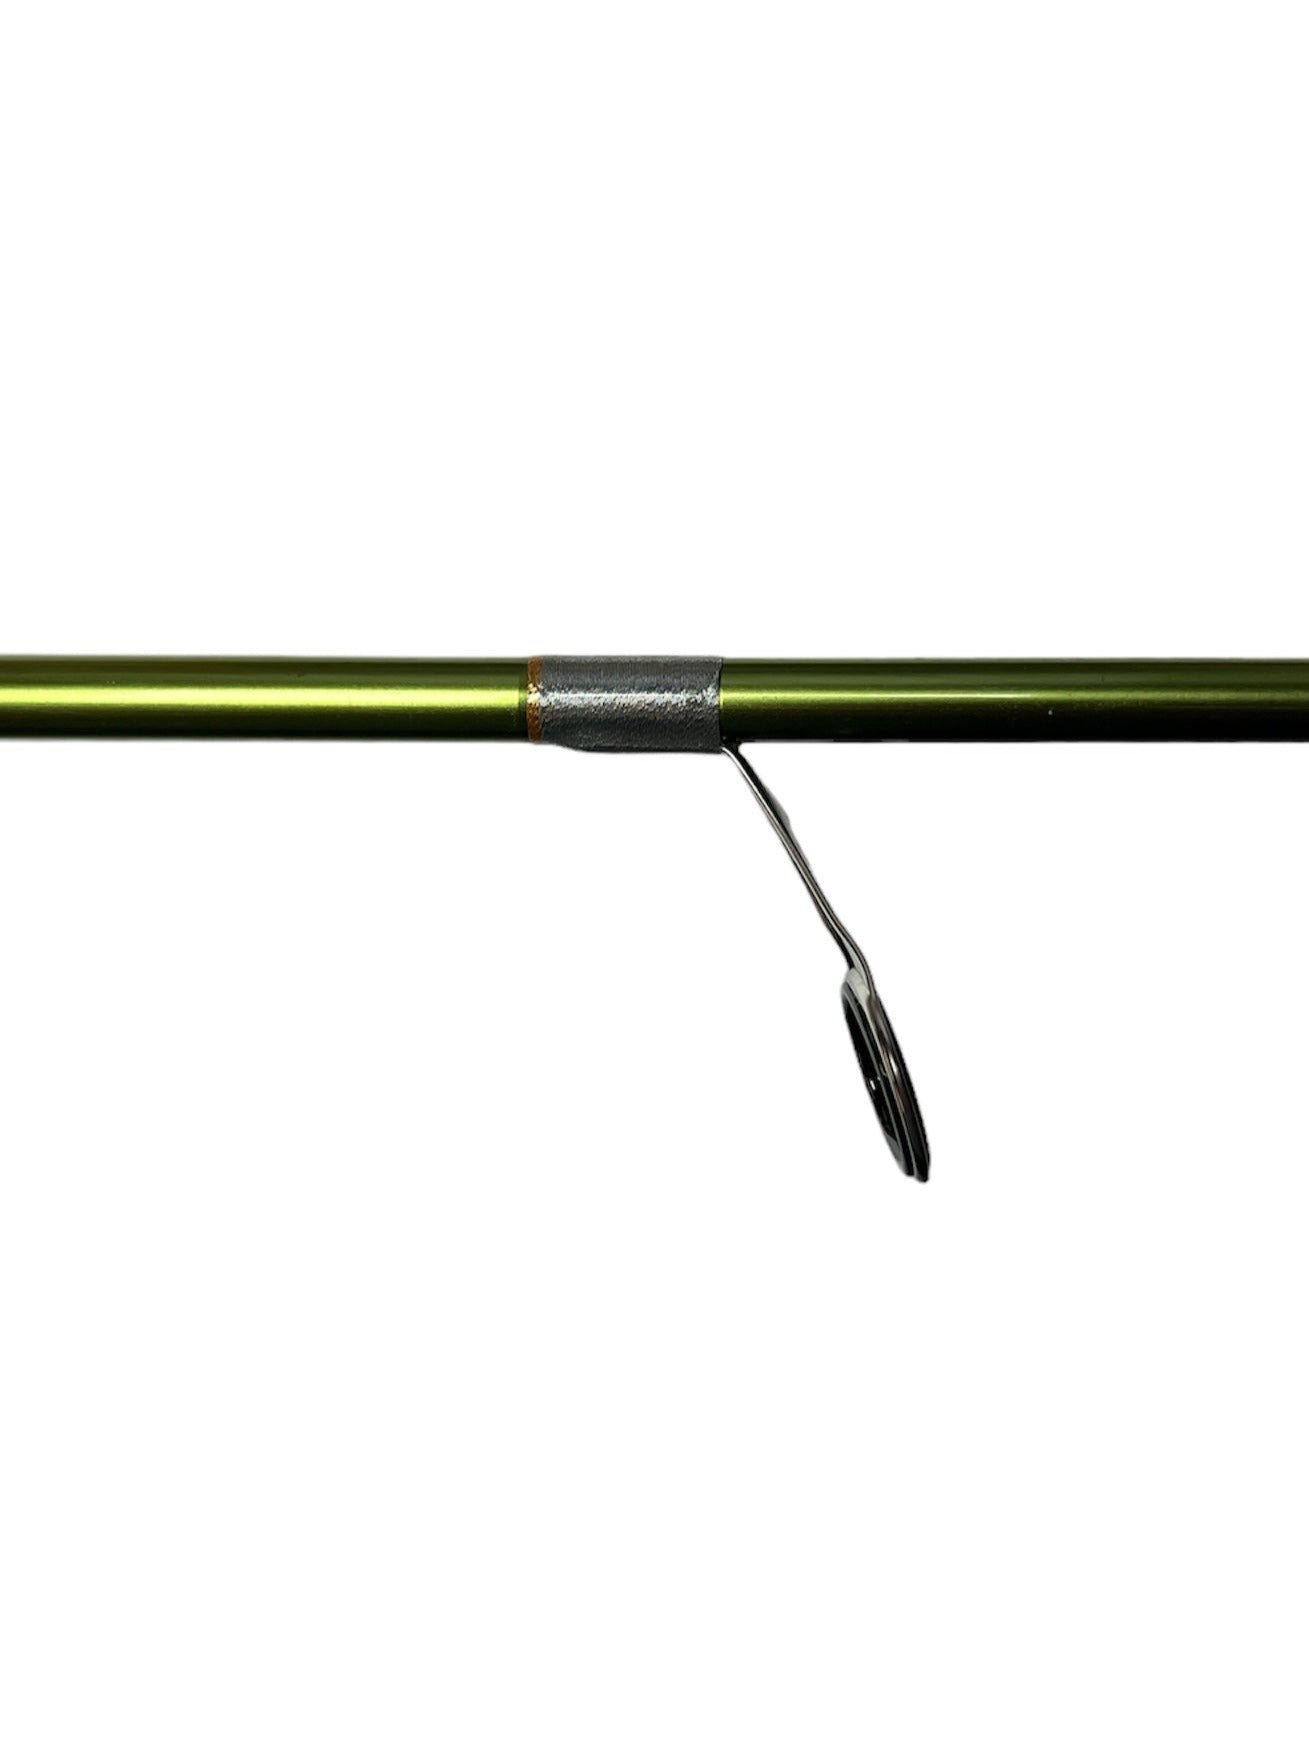 6'10" Med-Light Power Extra Fast Action Precision Strike Series Pre-Built Spinning Rod - Green & Silver